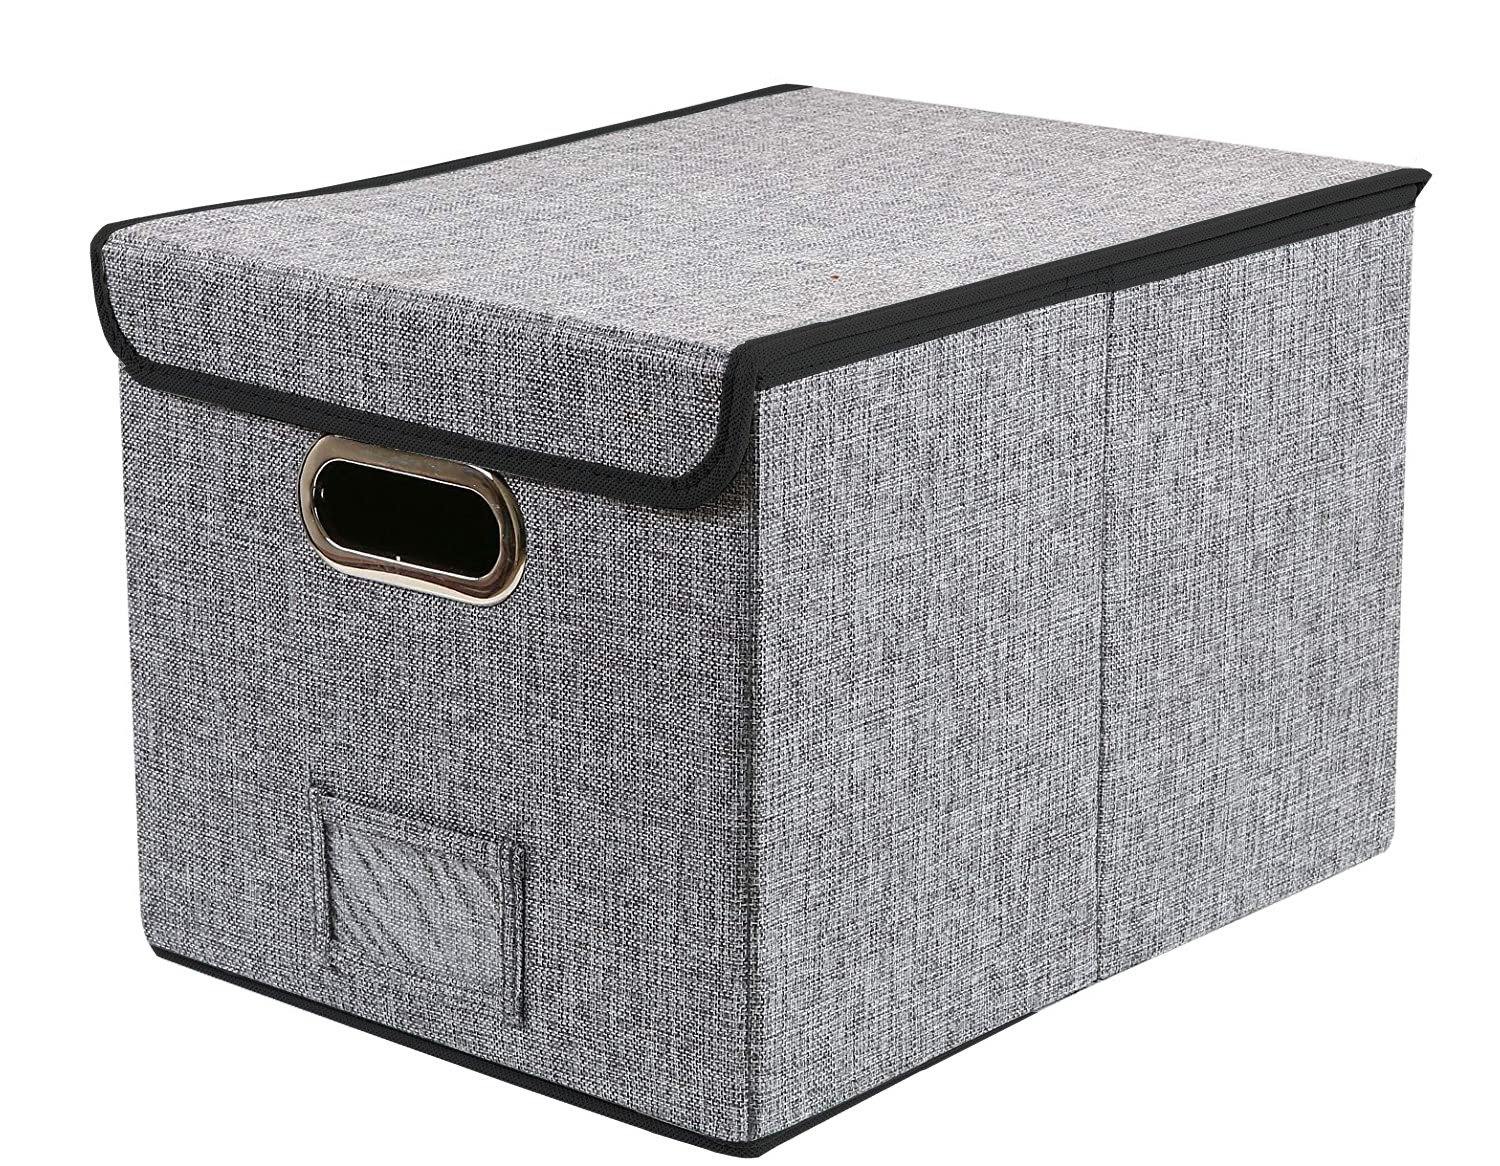  Collapsible Storage Box